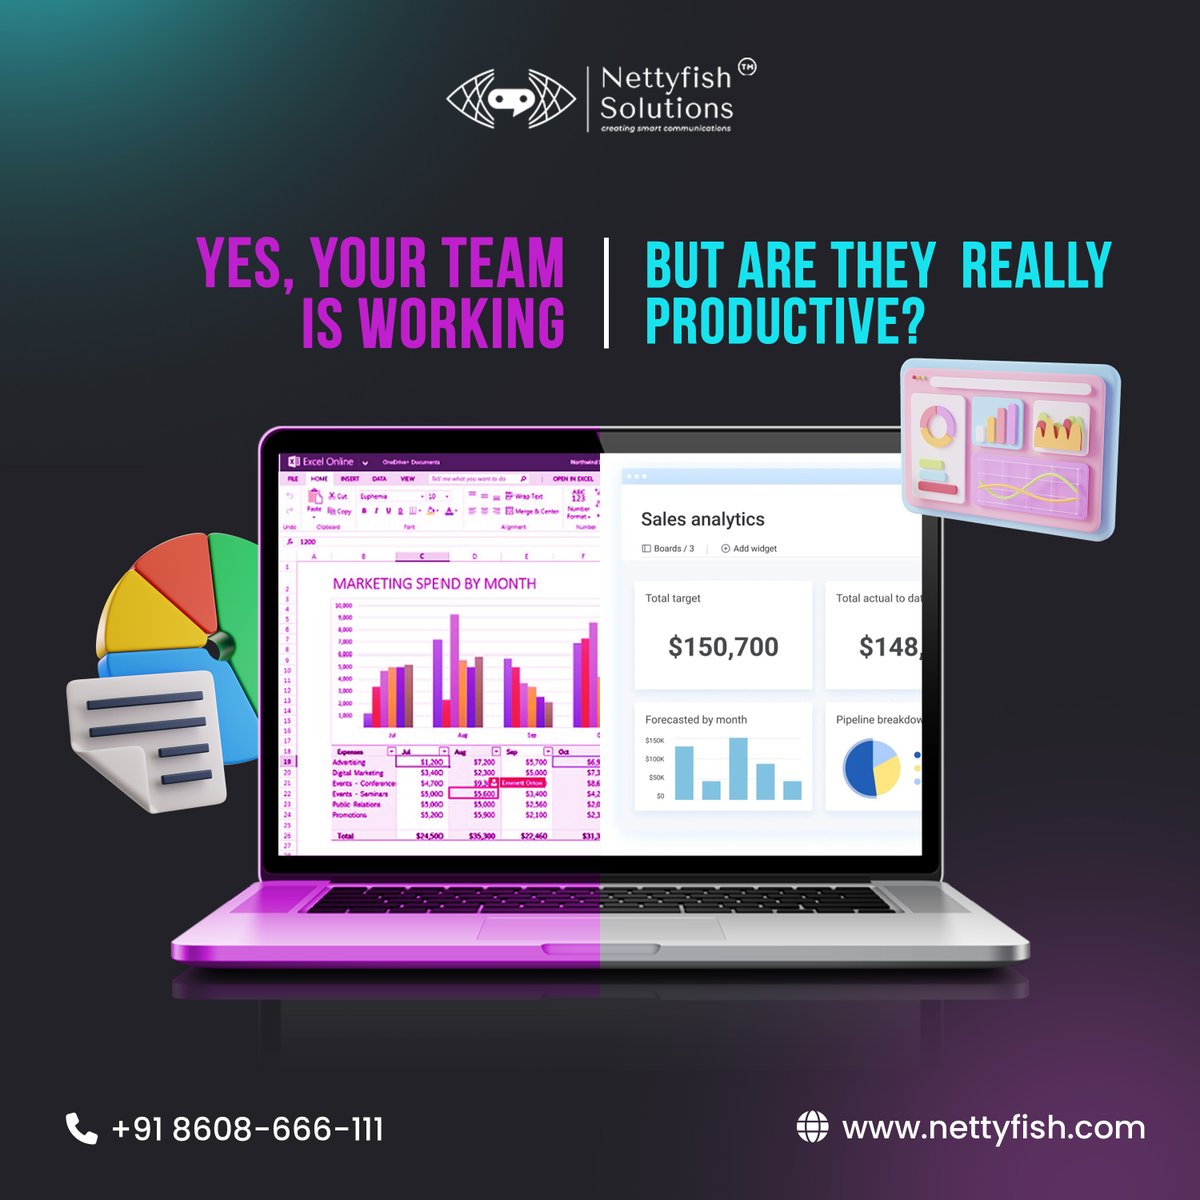 Still, using the old excel and sticky notes? Nettyfish CRM simplifies your workflow so you can focus on your business growth!😉 Get your team the right software to close more deals! 💼  #Netttyfish #CRM #Software #Sales #Productivity #CRMSoftware #BusinessAutomation #BoostSales